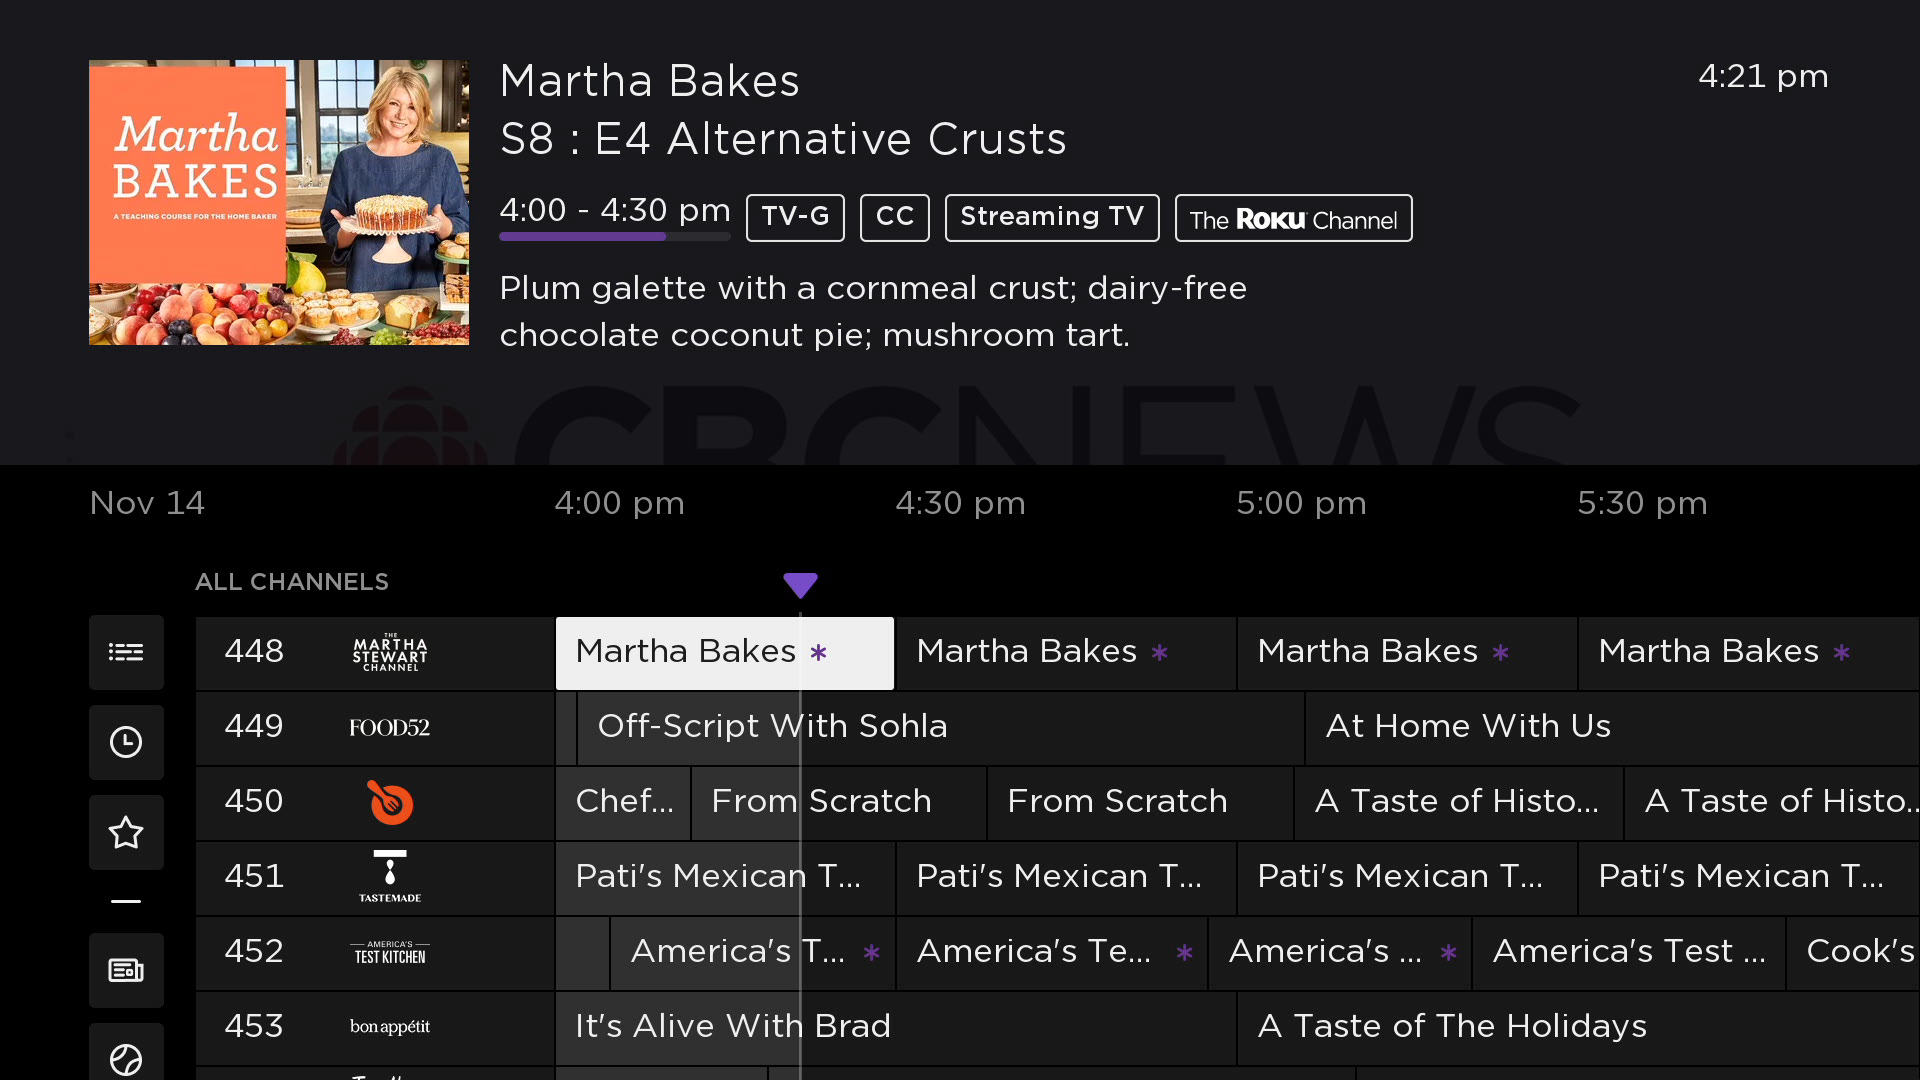 More linear channels now available on The Roku Channel